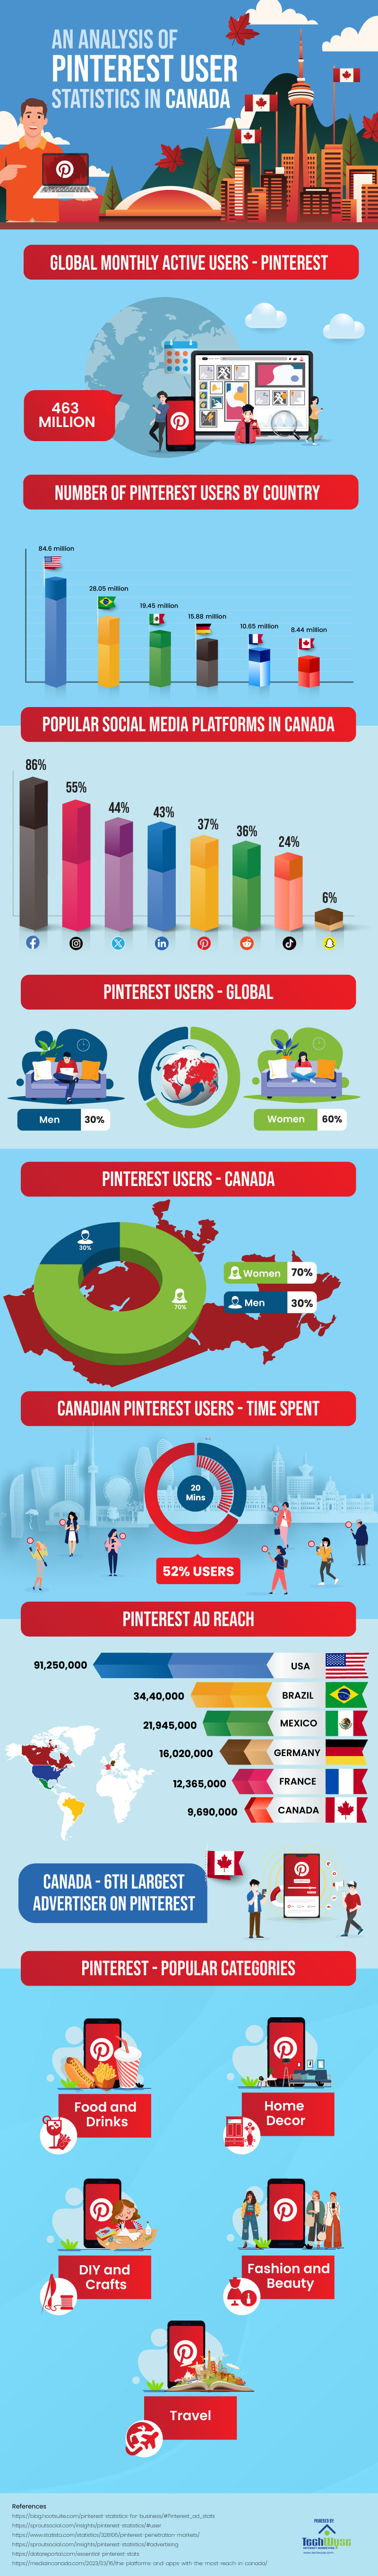 An Analysis of Pinterest User Statistics in Canada